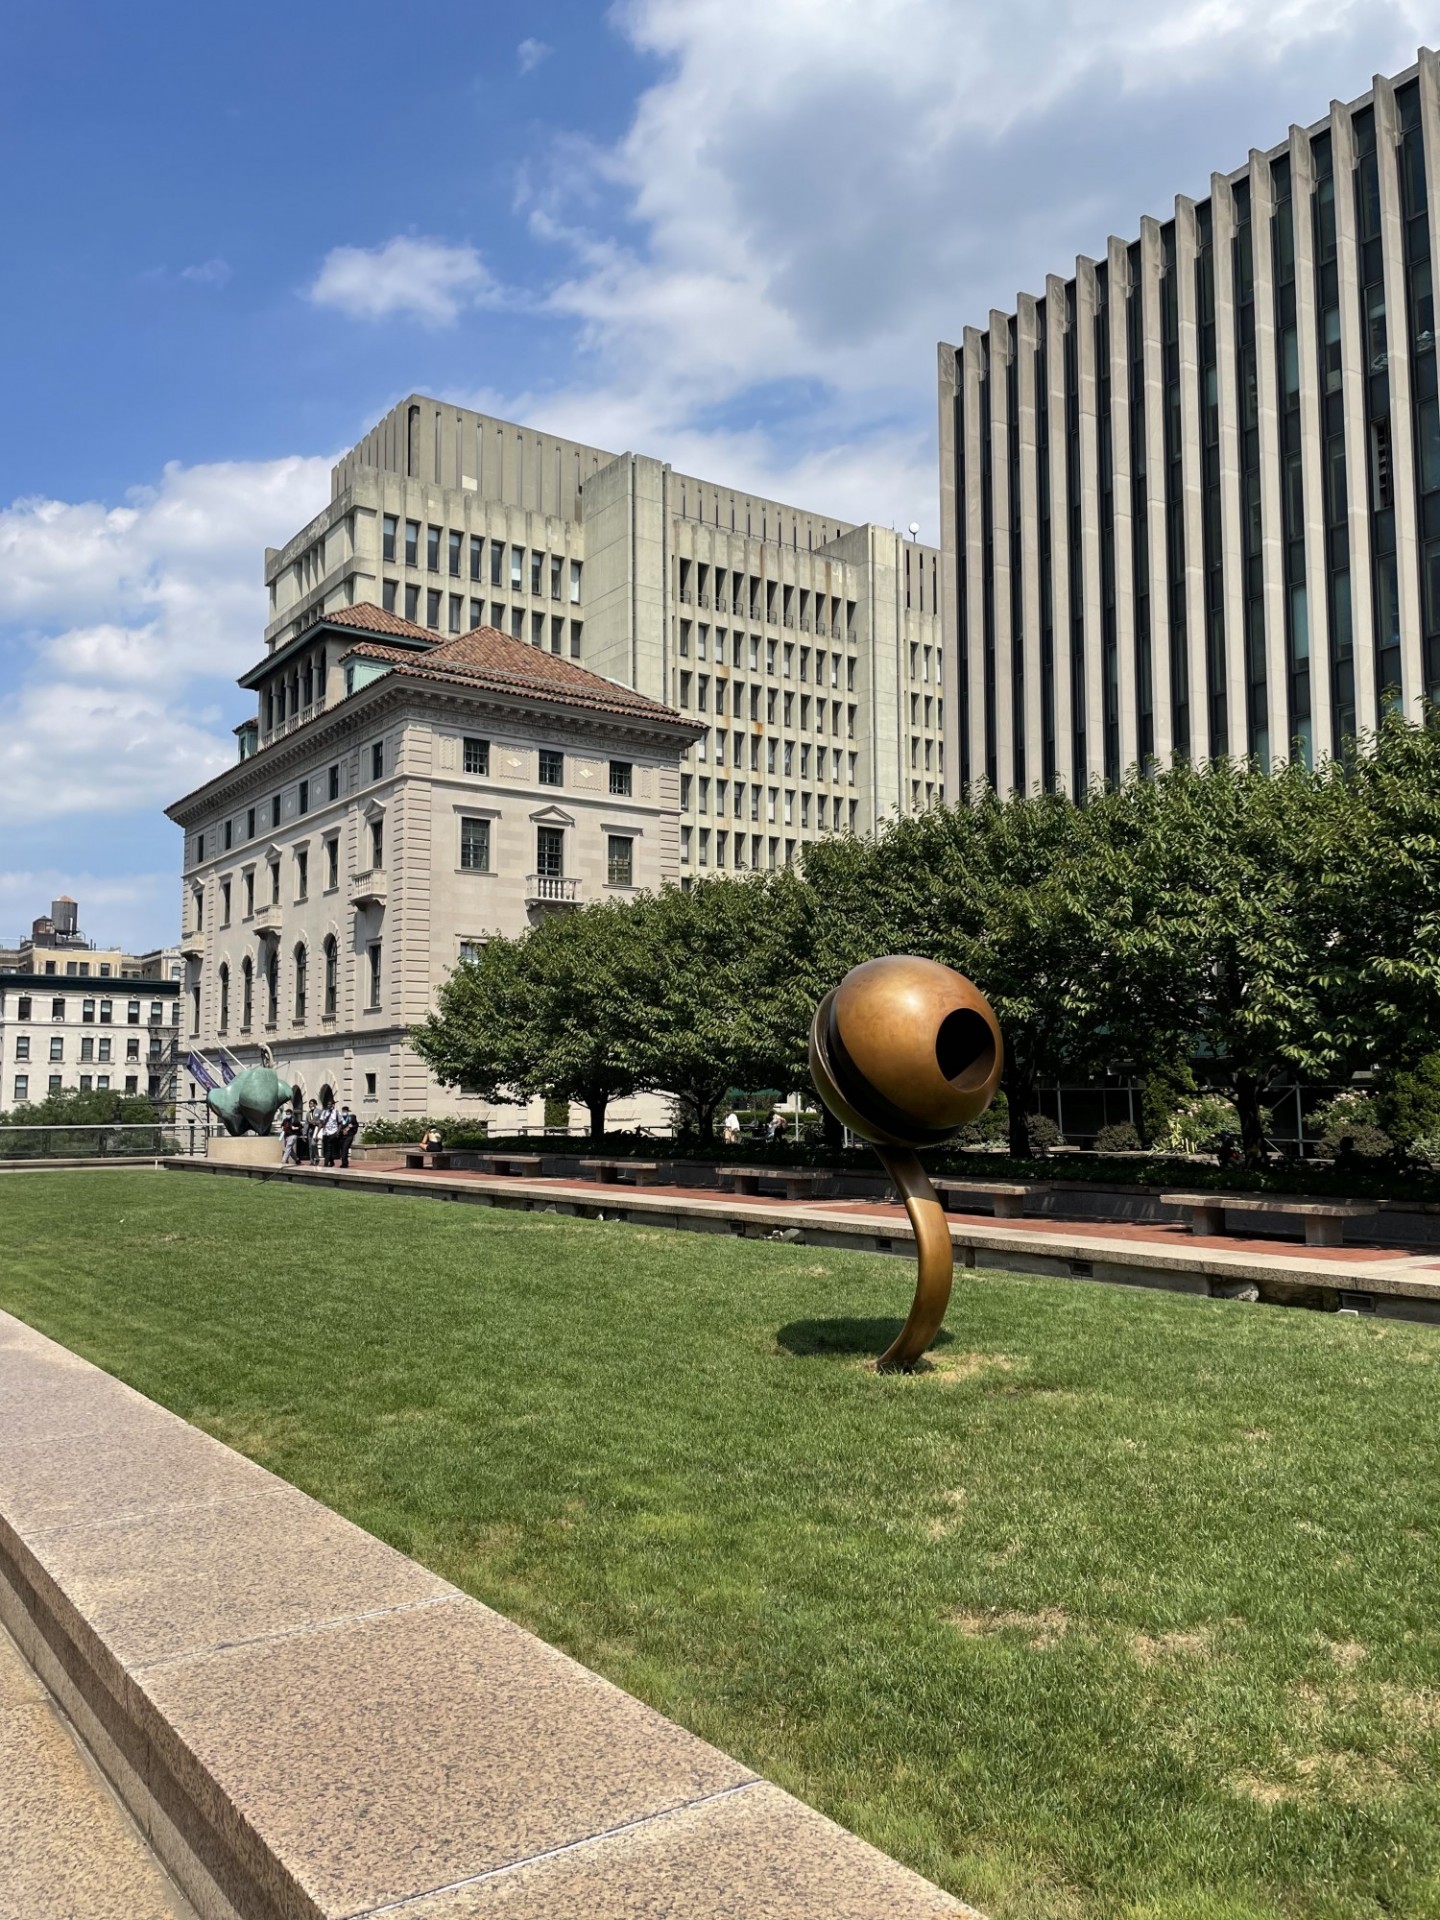 Photograph of Revson Plaza with David Bakalar's sculpture Life Force in foreground and the International Affairs Building in background